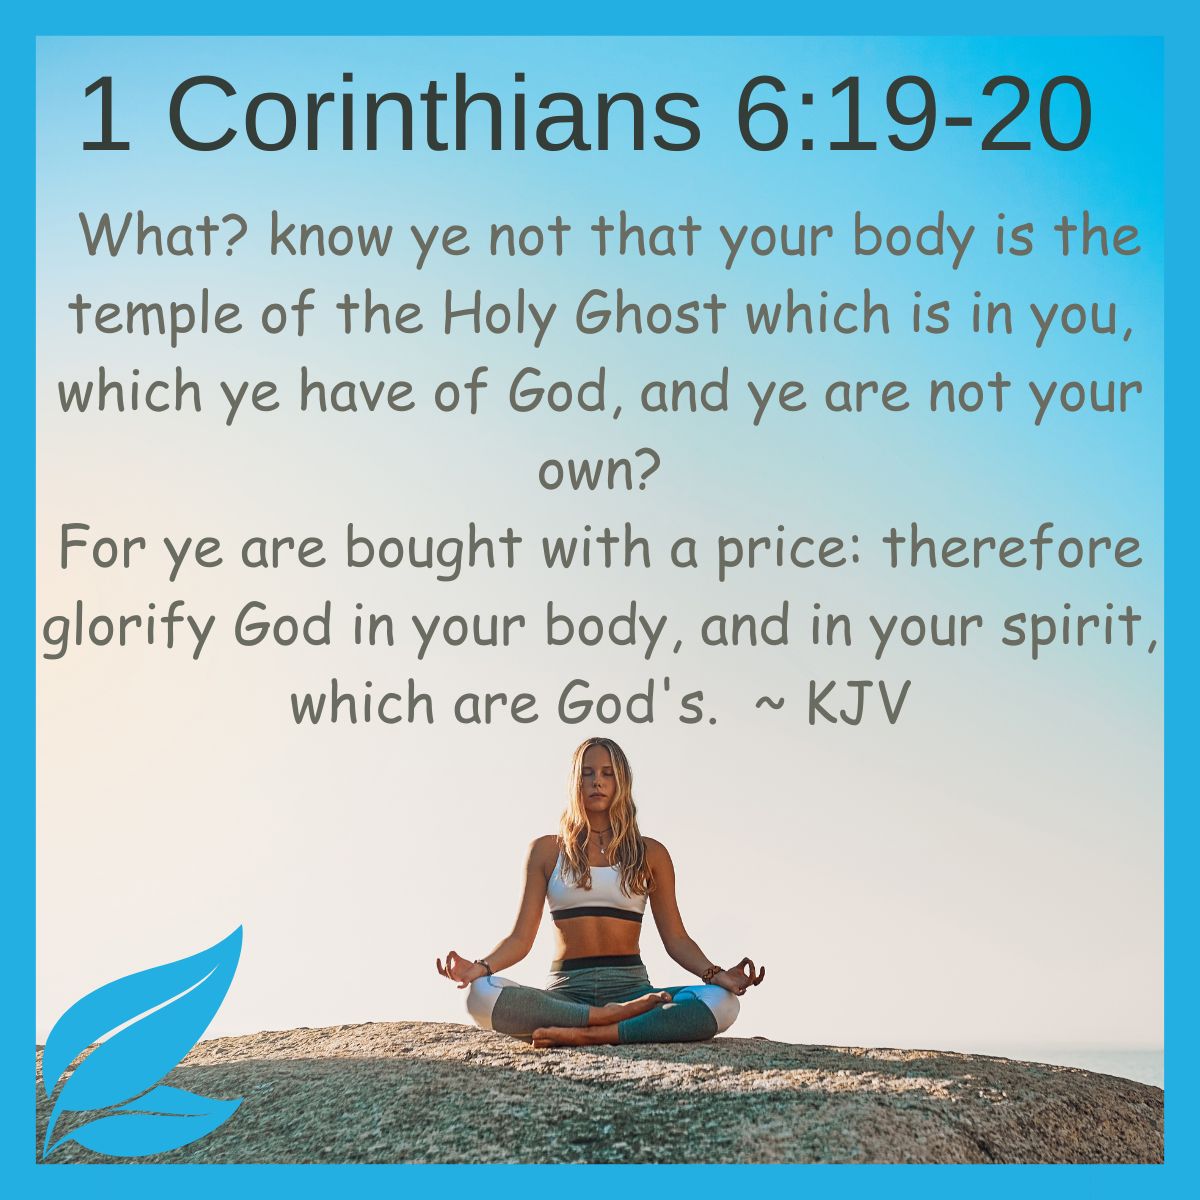 What? know ye not that your body is the temple of the Holy Ghost which is in you, which ye have of God, and ye are not your own? For ye are bought with a price: therefore glorify God in your body, and in your spirit, which are God's. 1 Corinthians 6:  19-20